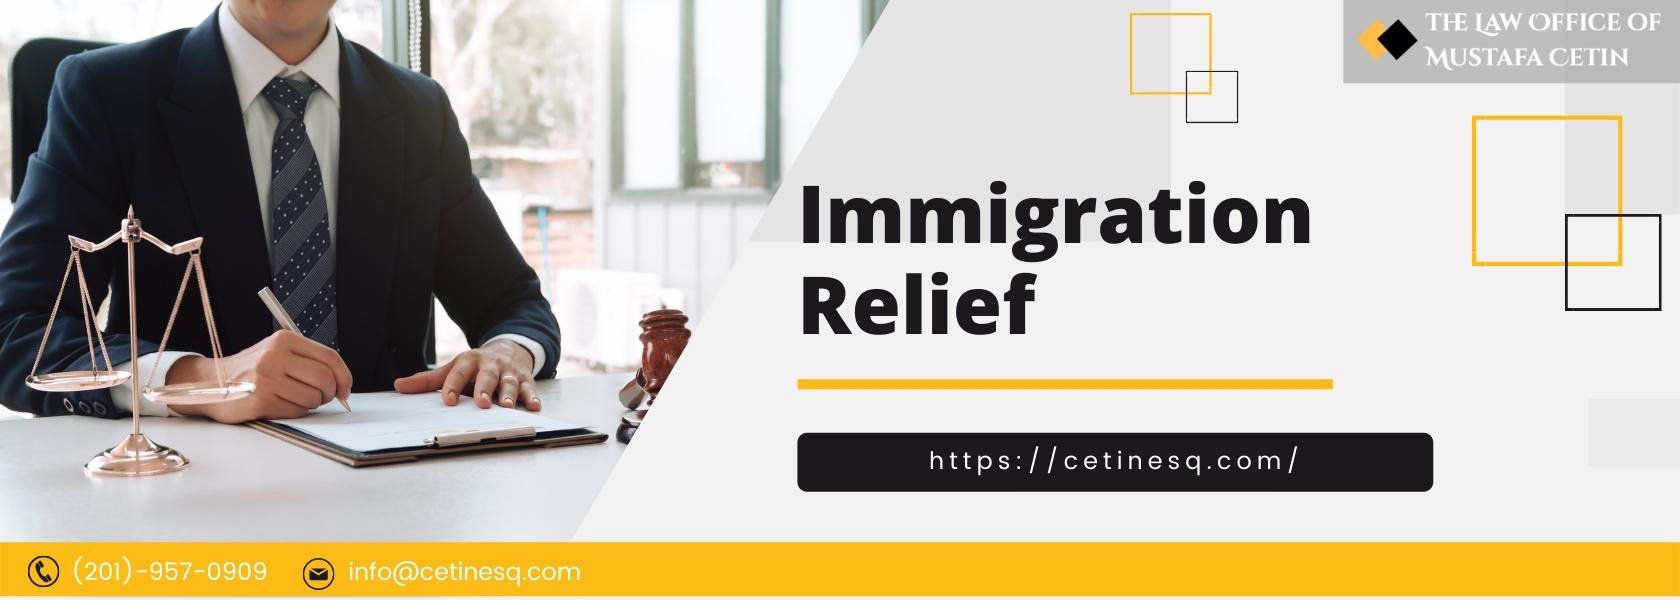 Common Forms of Immigration Relief if you are (or about to be) Out of Status